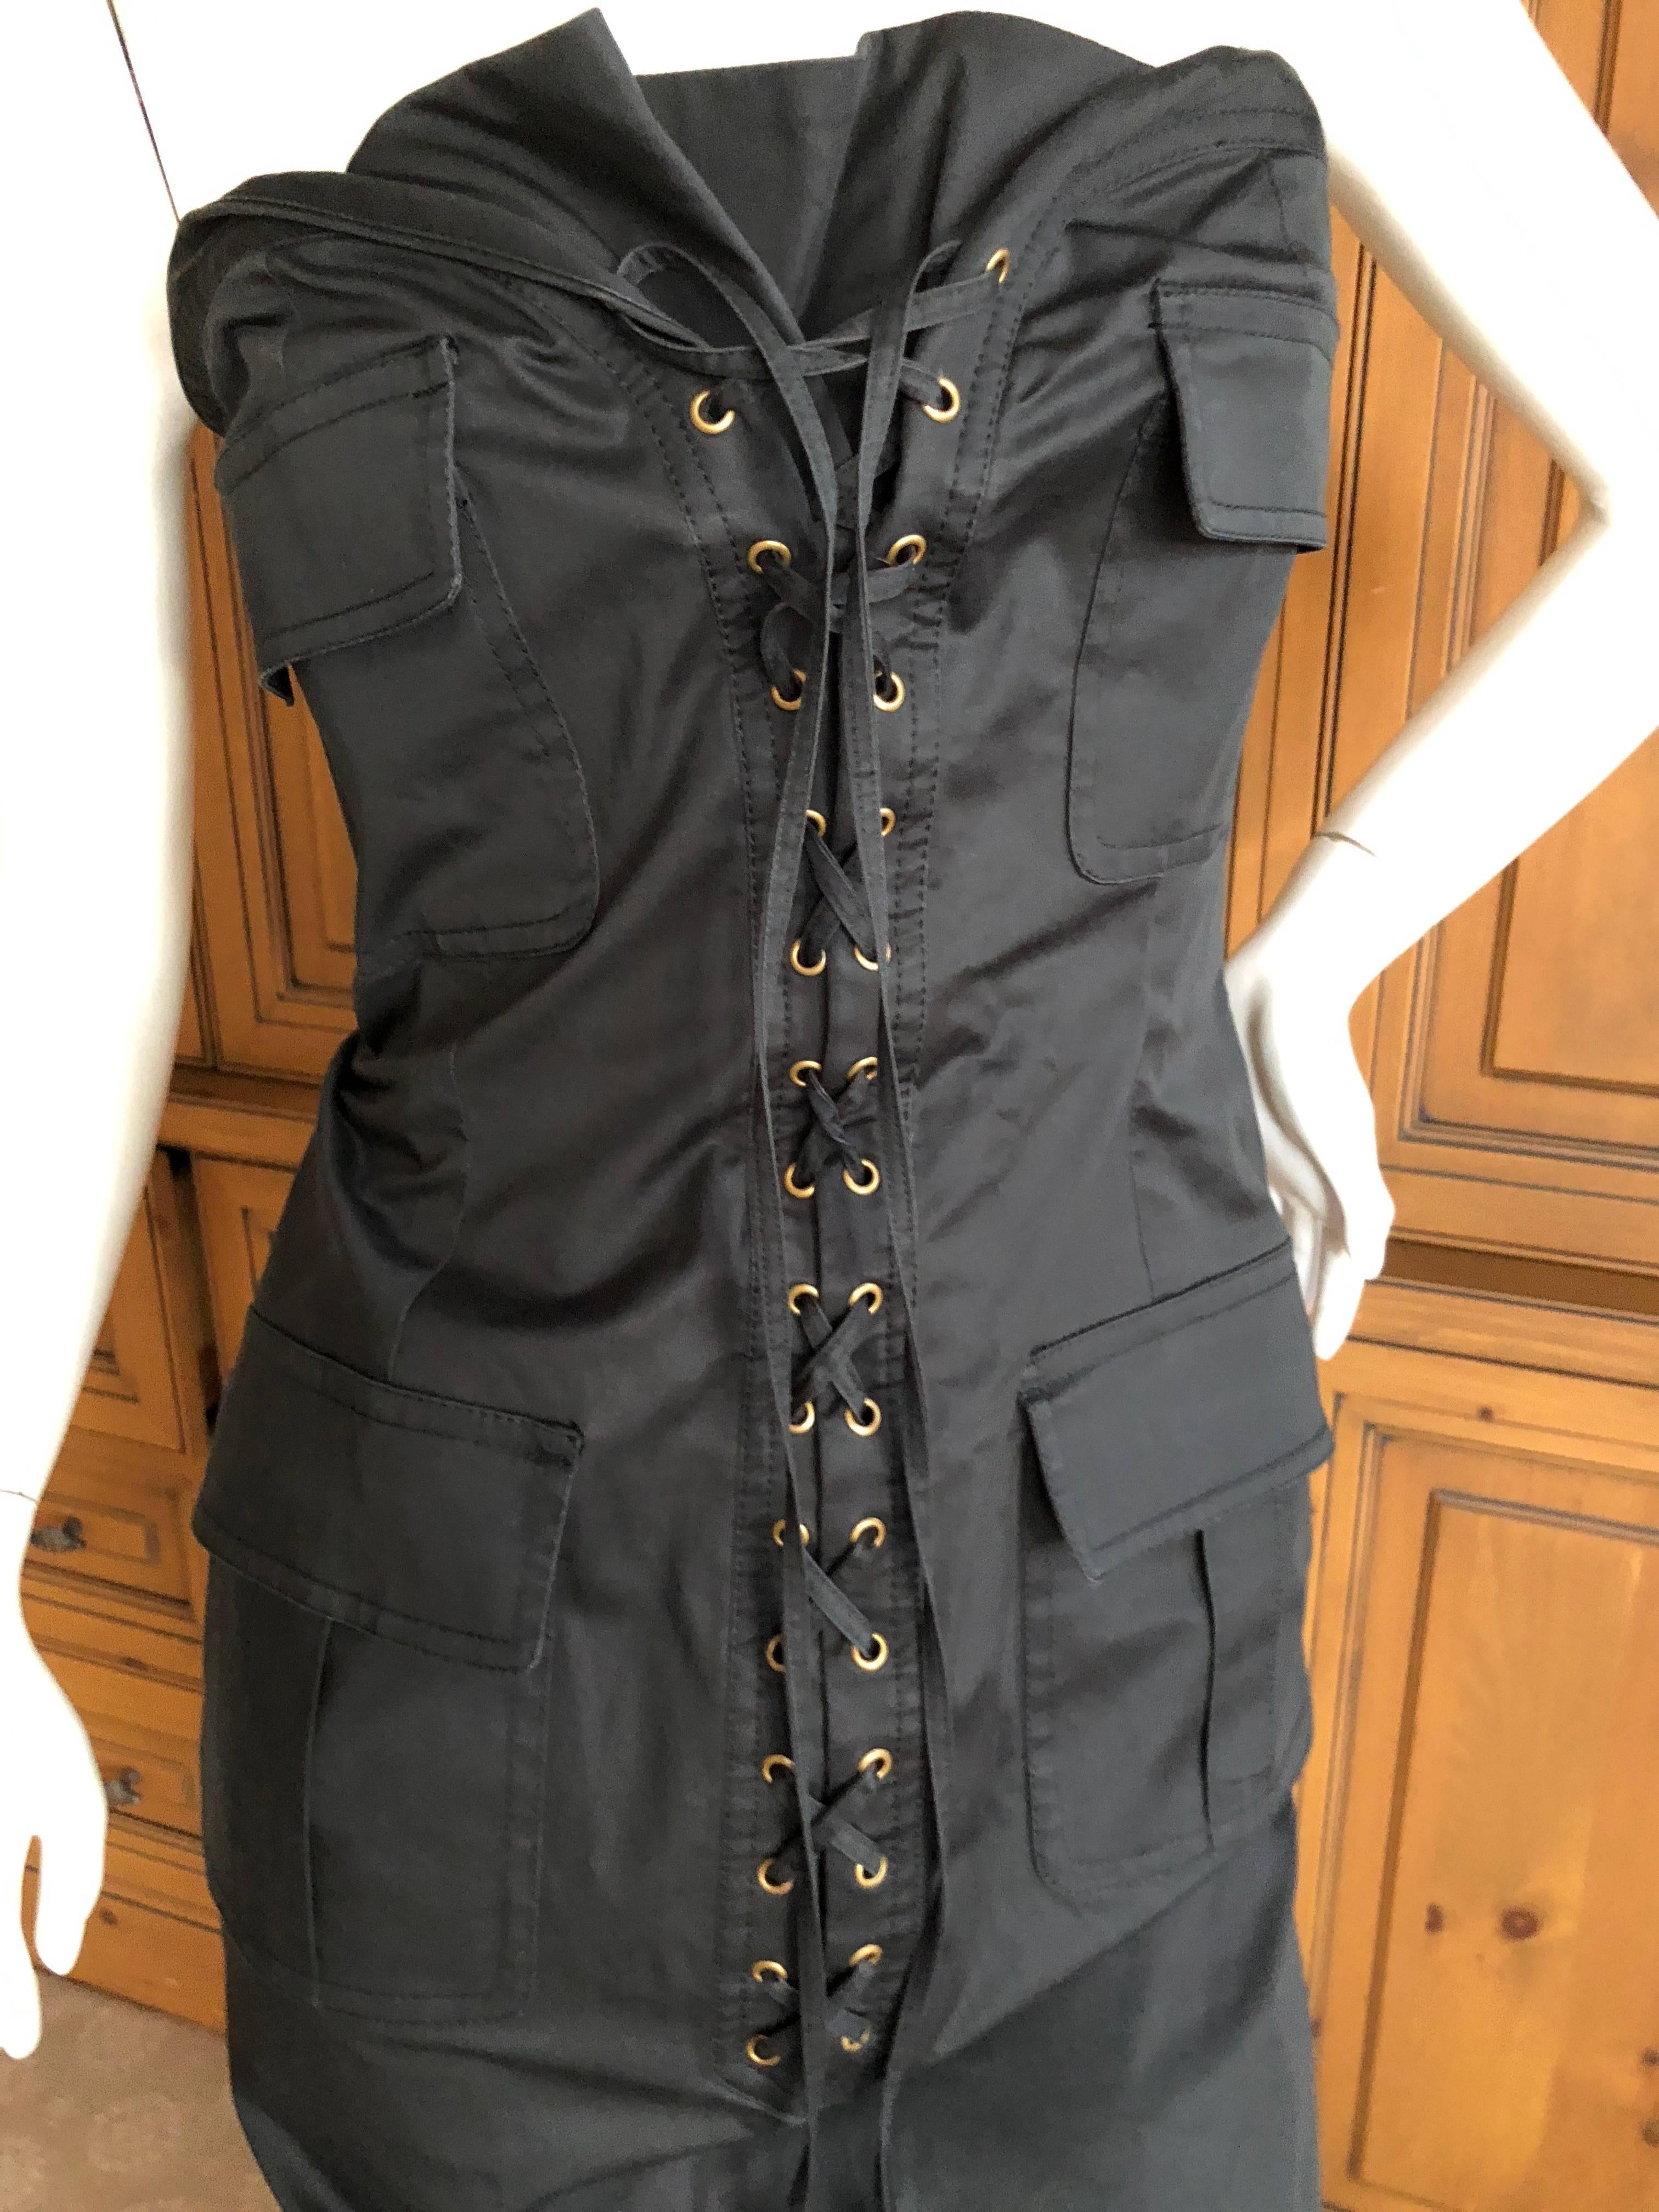 Yves Saint Laurent by Tom Ford Strapless Black Safari Dress with Corset Lacing  For Sale 1